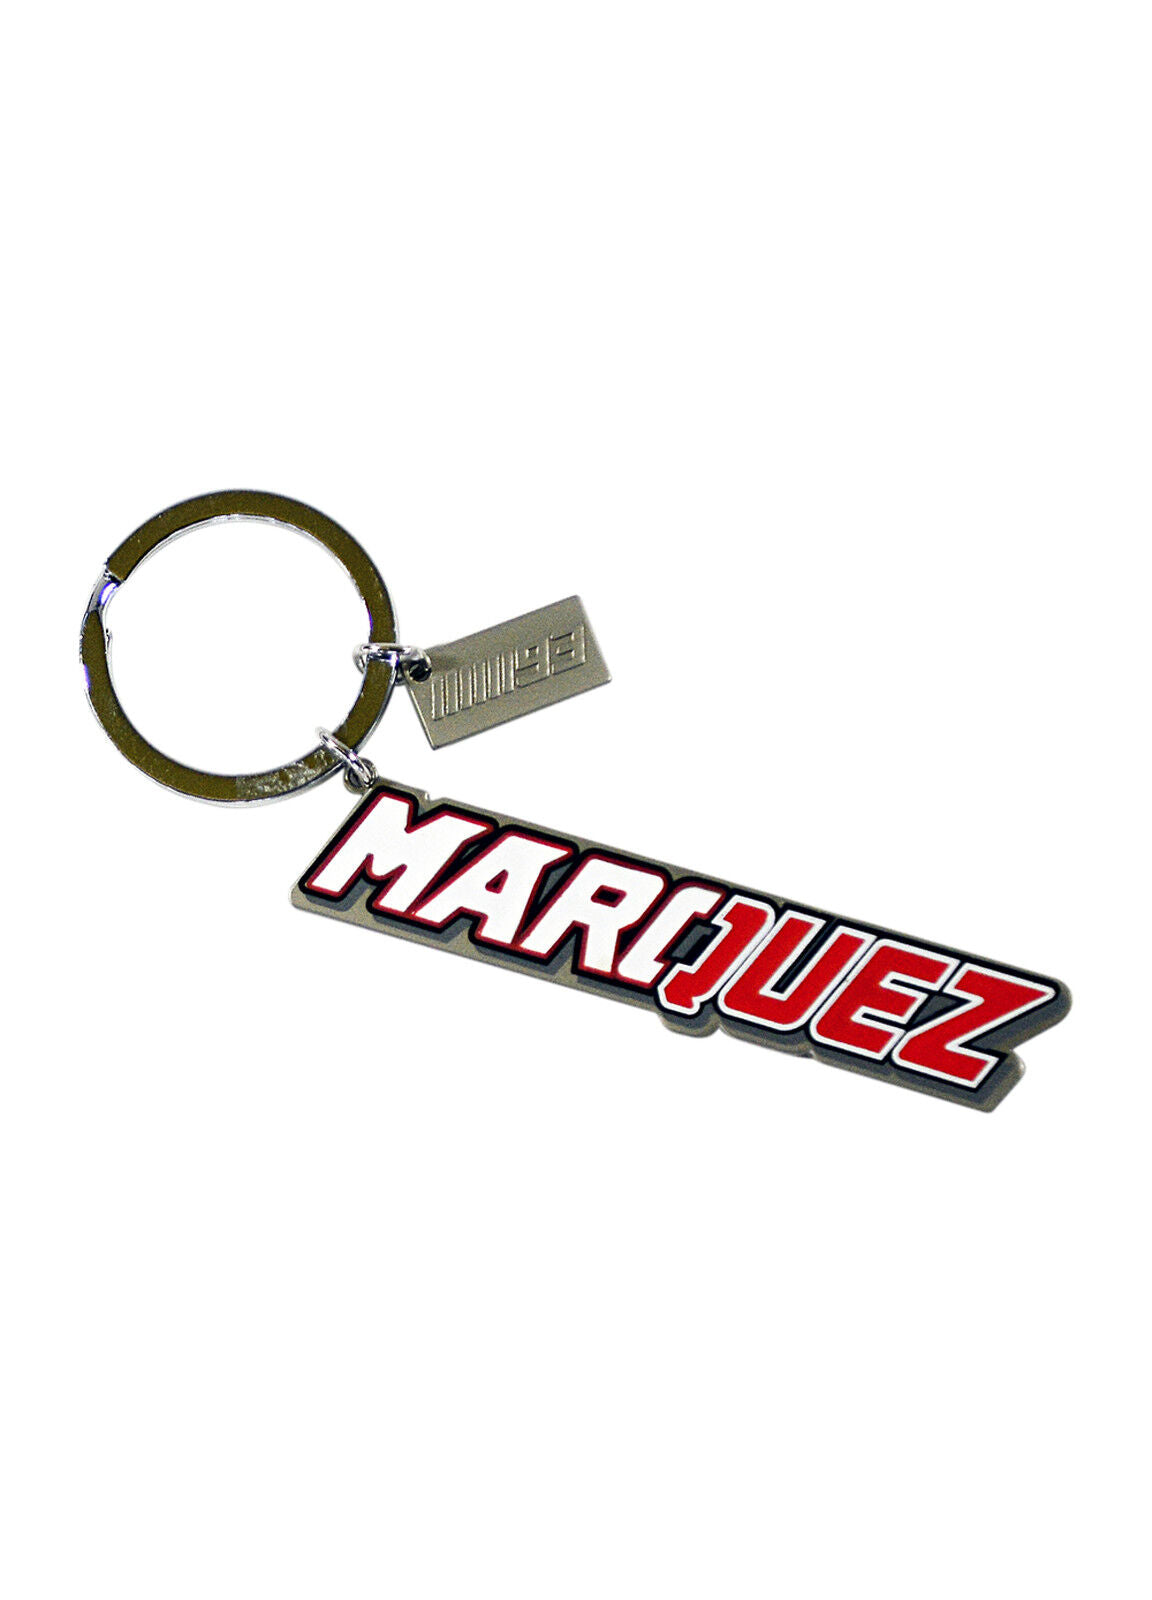 New Official Marquez Metal Key Ring - Mmukh 161903